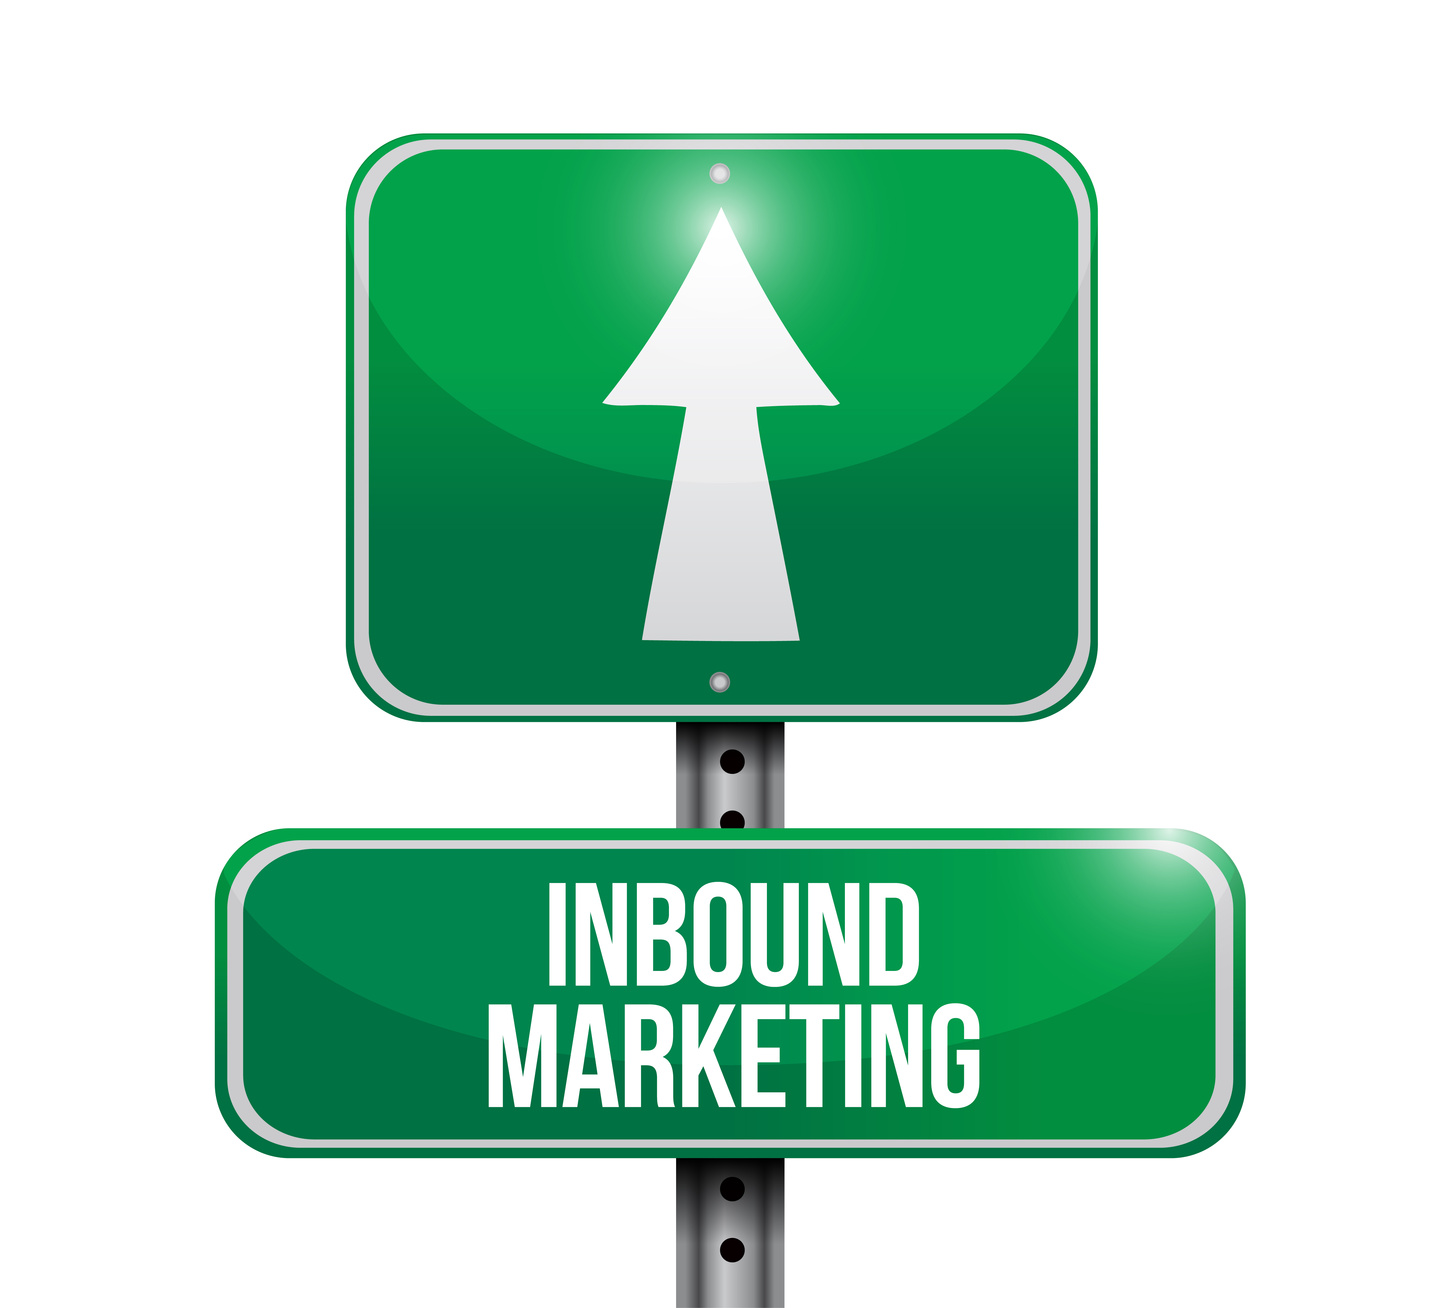 How to advertise your business using inbound marketing, first steps.